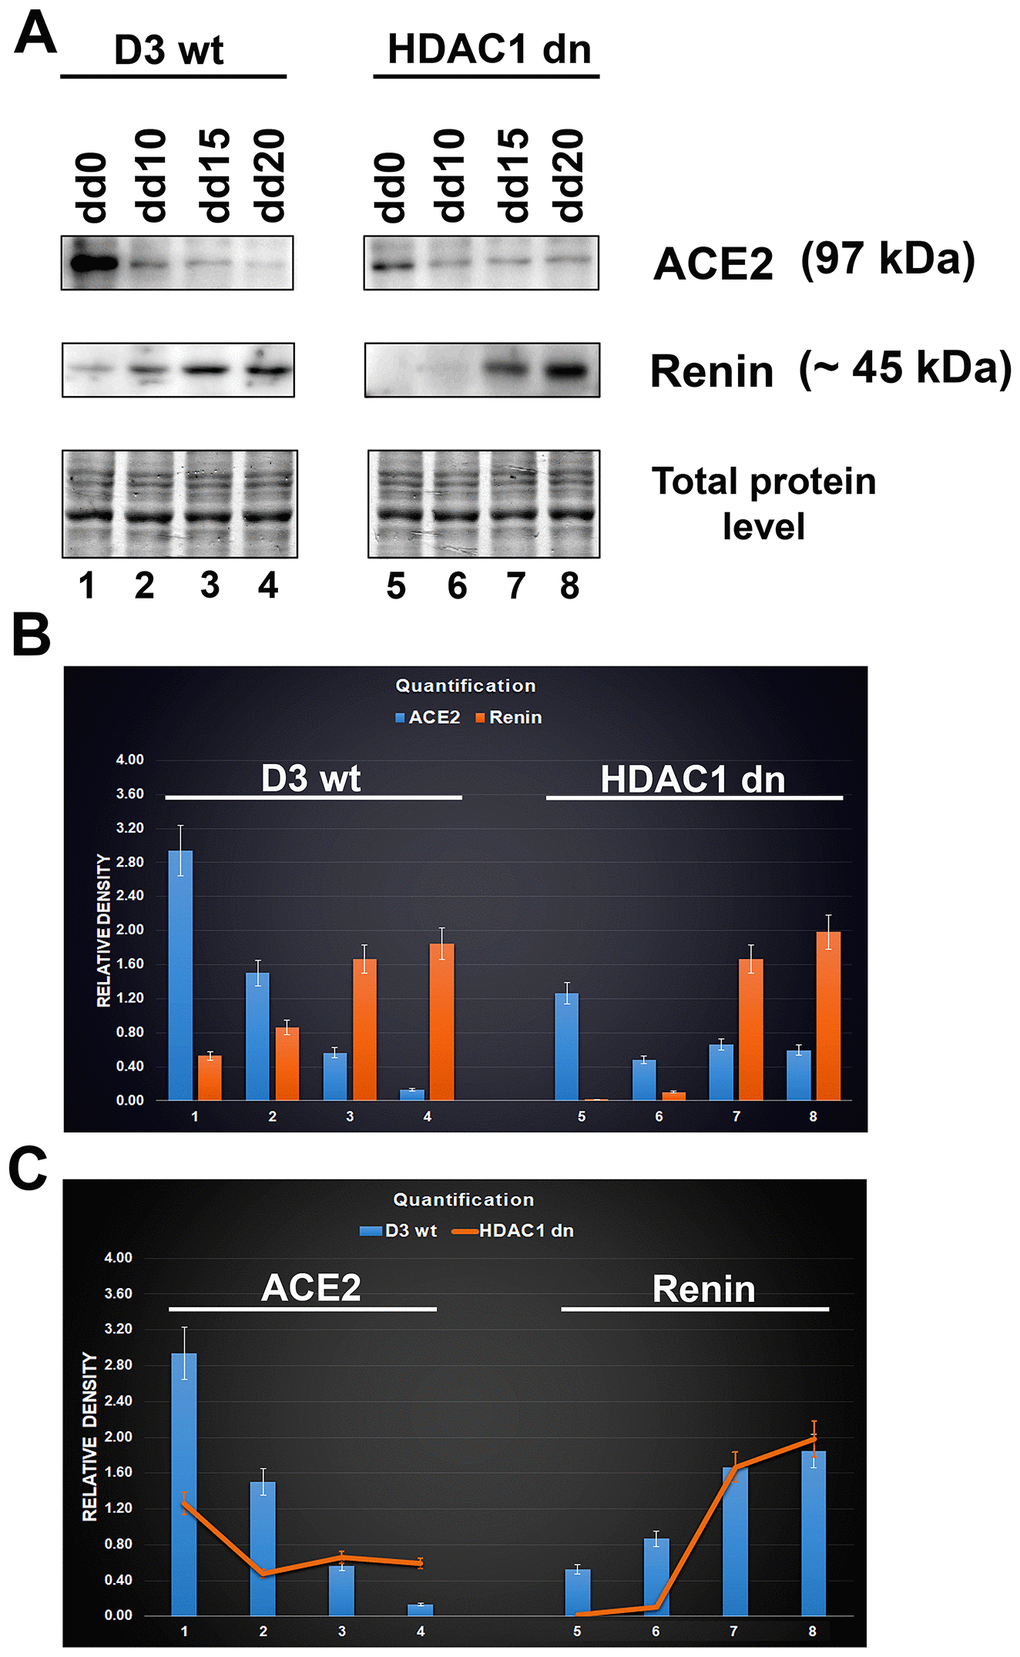 Downregulation of ACE2 in mESCs undergoing differentiation into cardiomyocytes. (A) western blot analyses were performed in HDAC1 wt (D3 wt) and HDAC1-depleted (dn) mES cells, non-differentiated and differentiated into cardiomyocytes. The data show the levels of the ACE2 protein and renin normalized to the total protein levels. (B) Quantification of the protein levels, as assessed by western blotting, was performed using ImageJ software; the bar chart shows the comparison of protein levels in differentiated wt mESCs and differentiated HDAC1 dn mESCs. (C) The graphical illustration shows the comparison of ACE2 and renin (separately) in differentiated wt mESCs and differentiated HDAC1 dn mESCs.